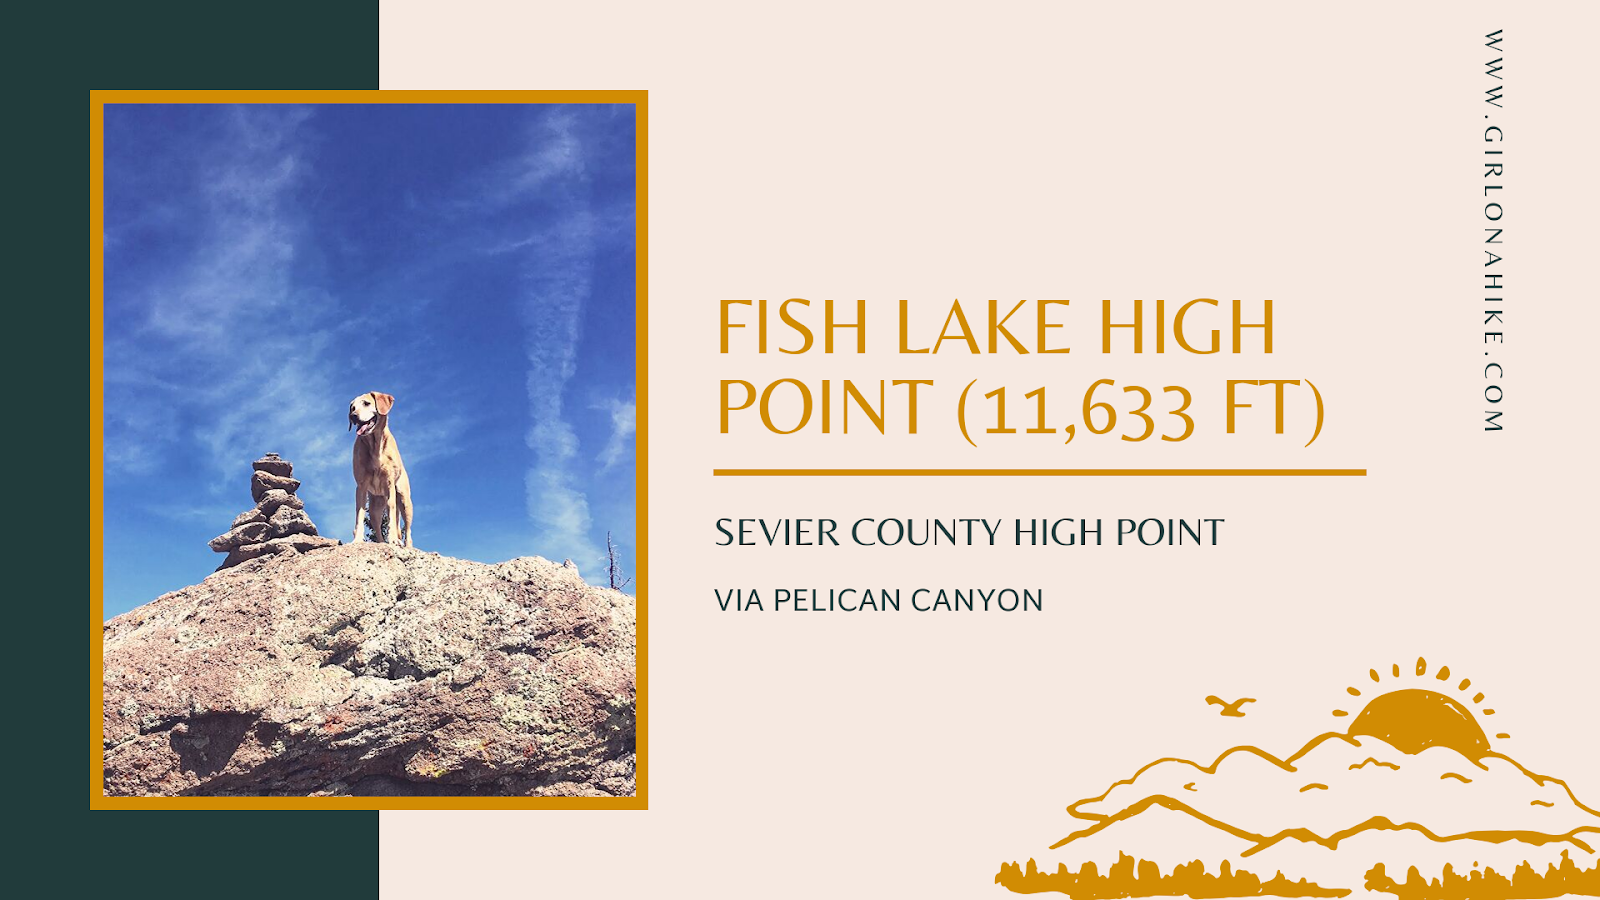 Hiking to Fish Lake Hightop, Sevier County High Point